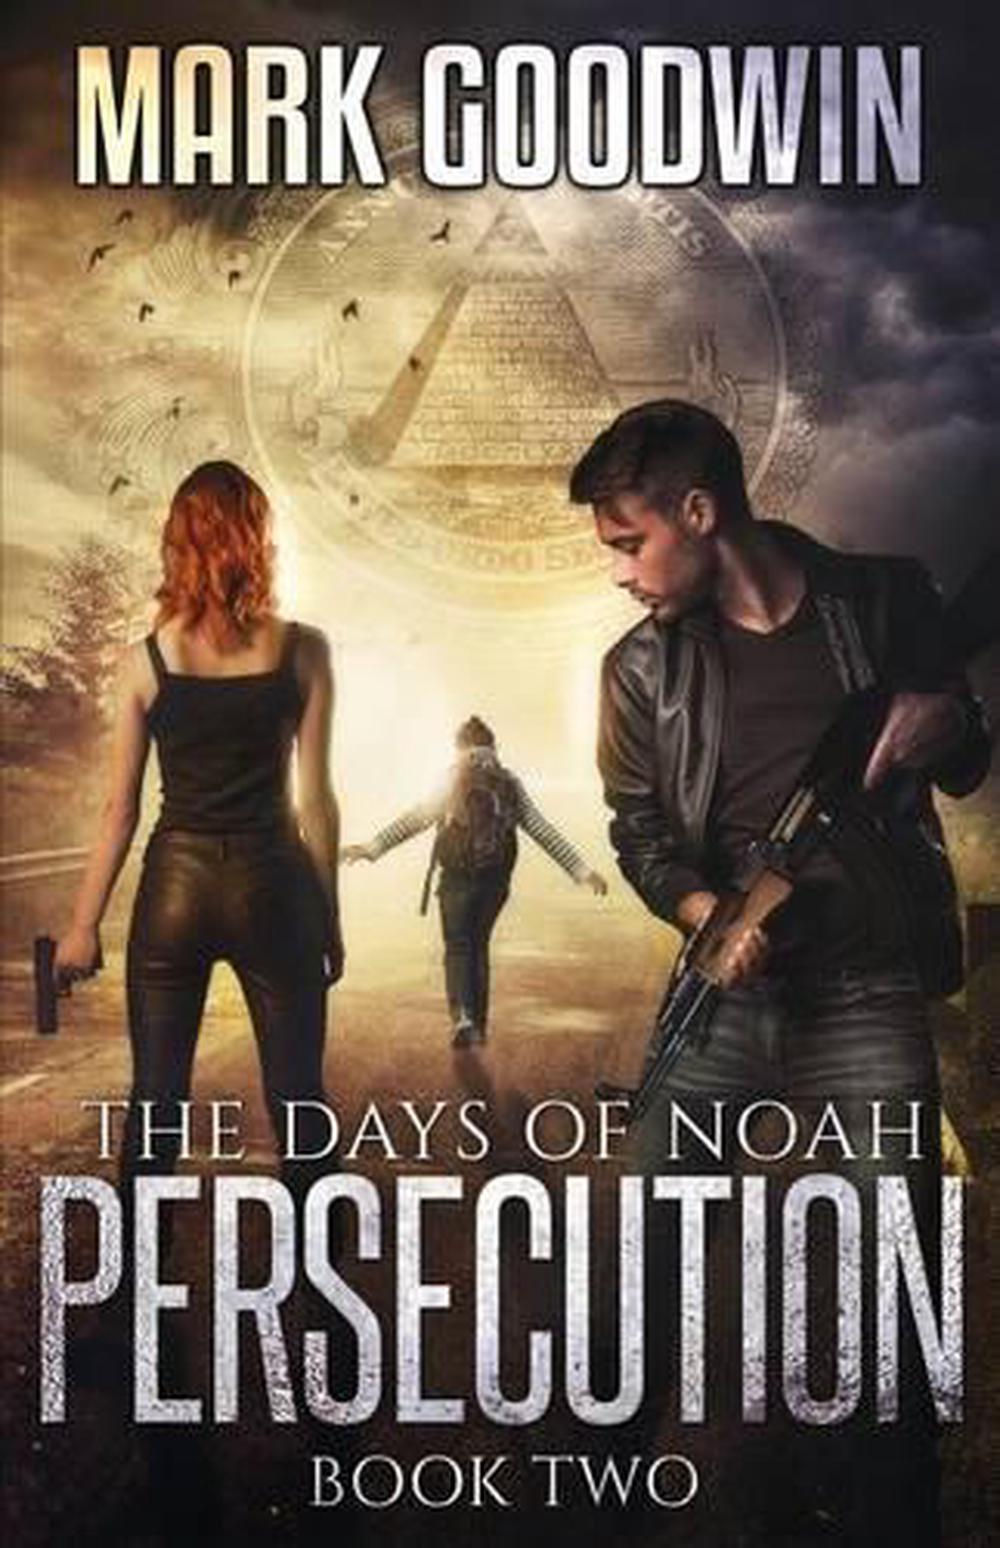 The Days of Noah: Book Two: Persecution by Mark Goodwin (English ...